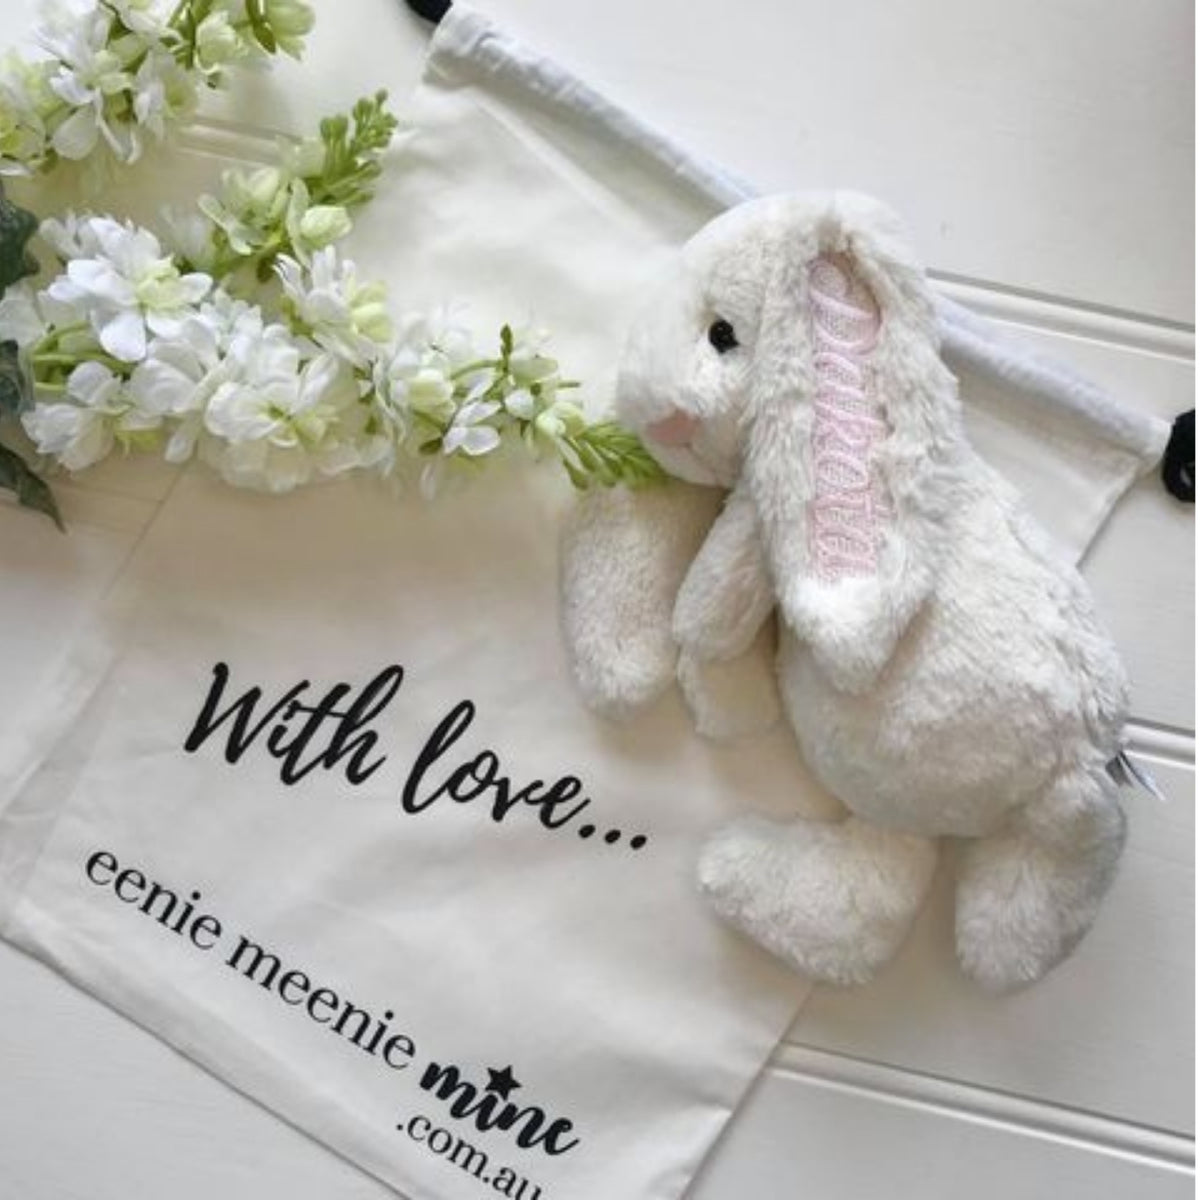 personalised Jellycat Bunny Australia Cream White rabbit with name on ear